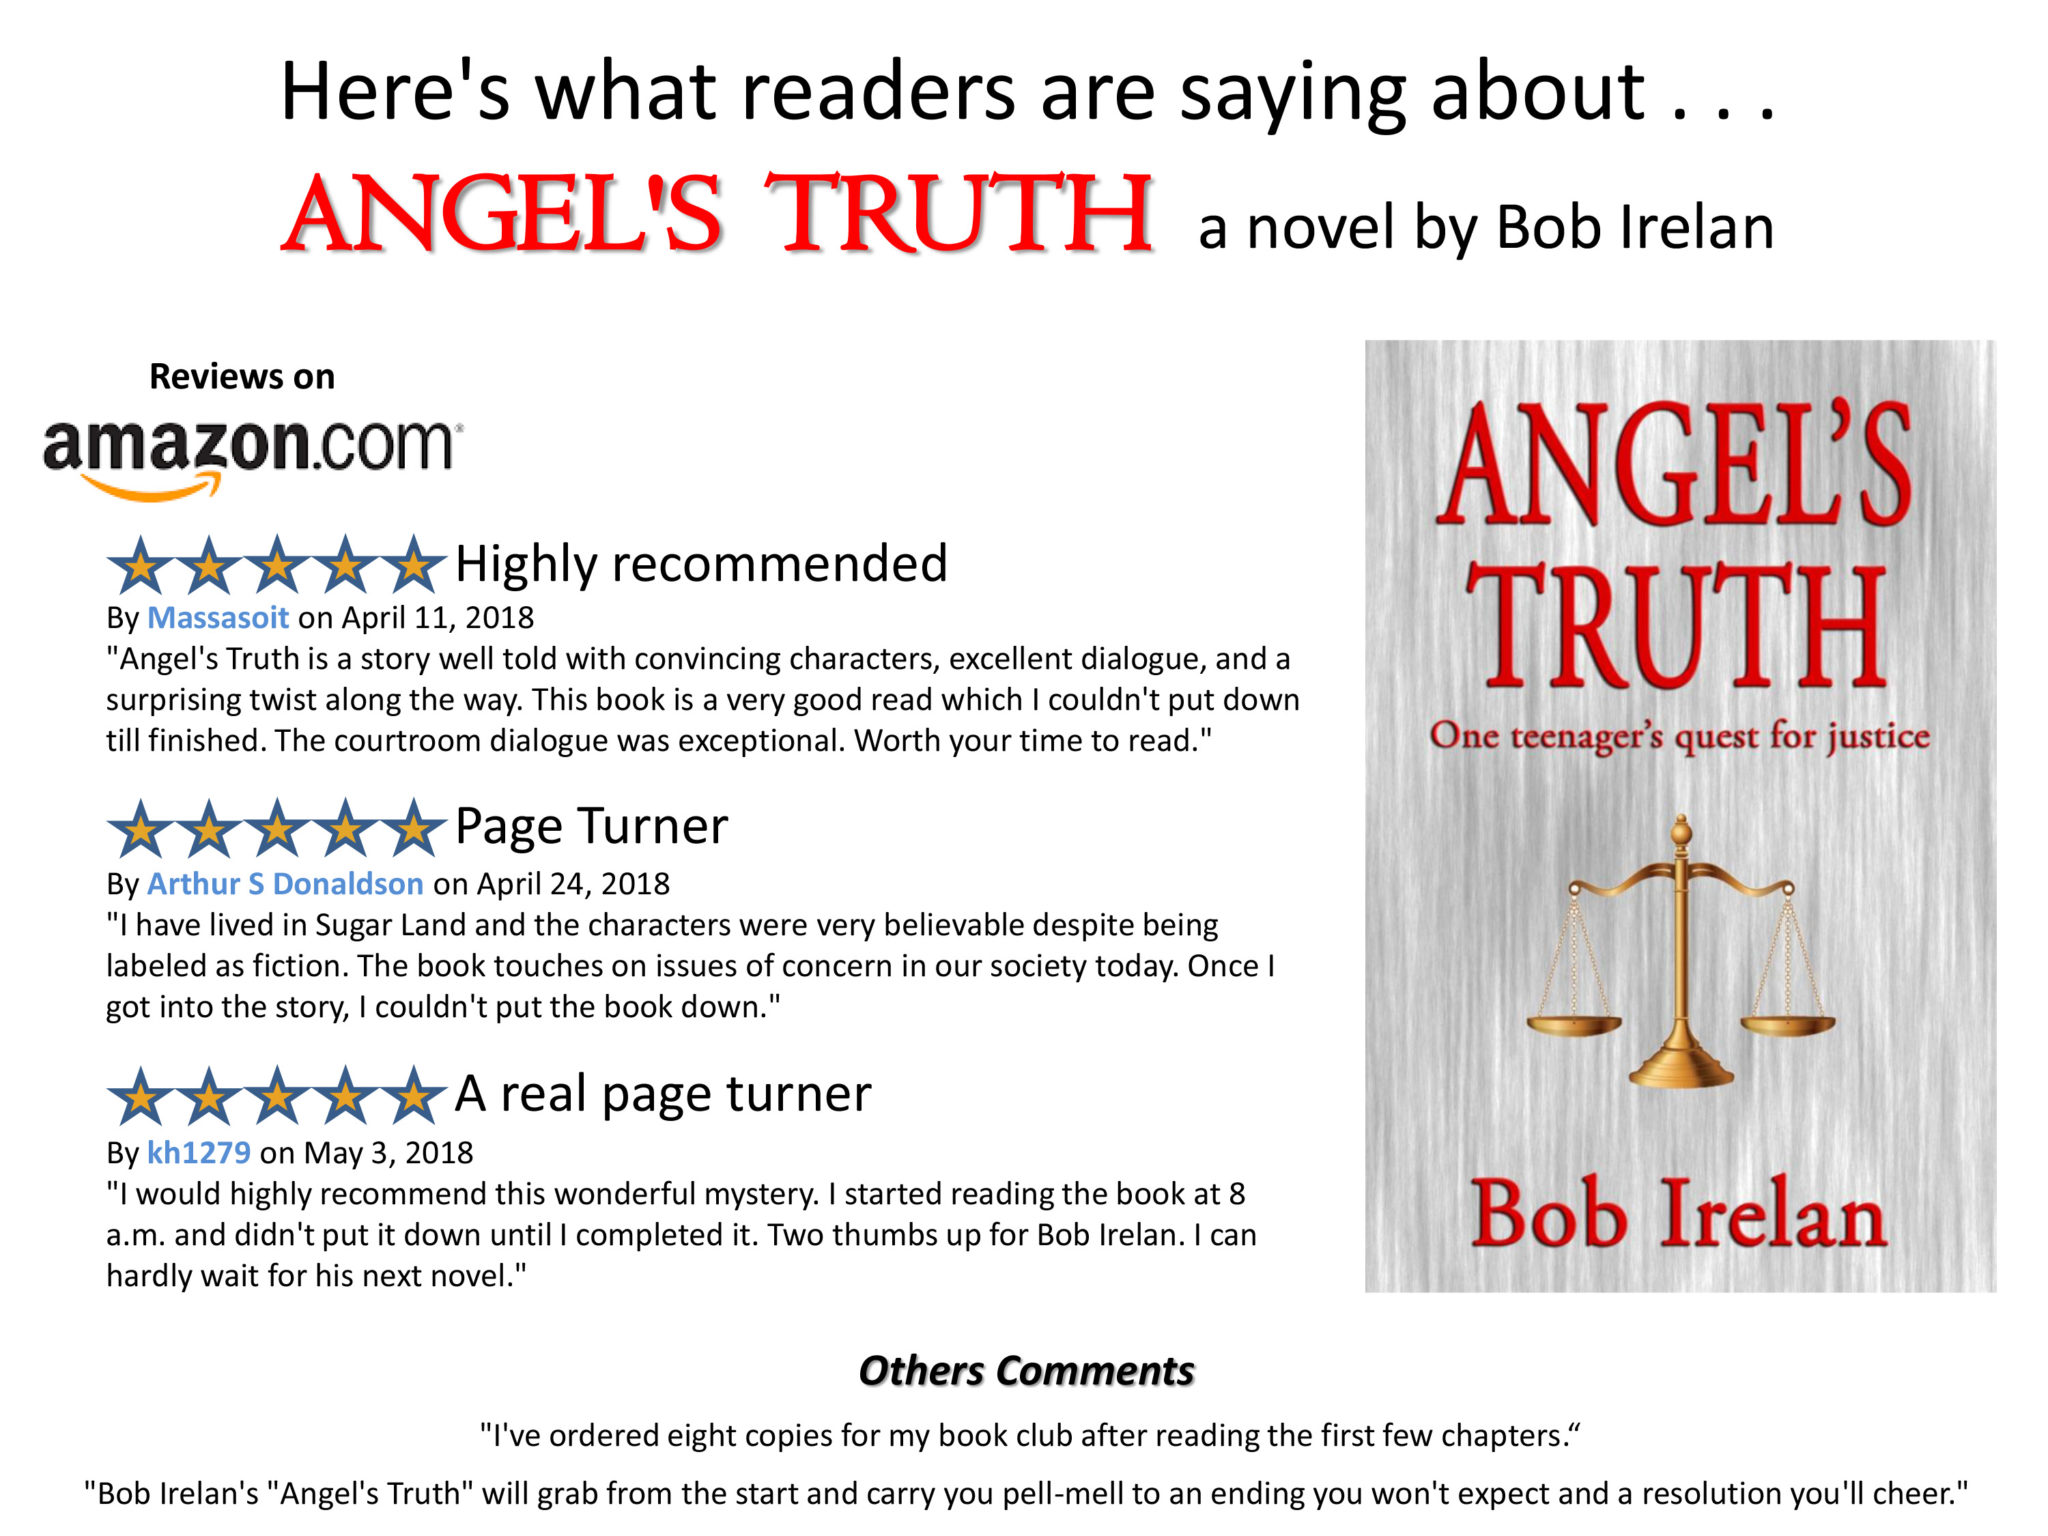 Angel's Truth has a five-star rating on Amazon